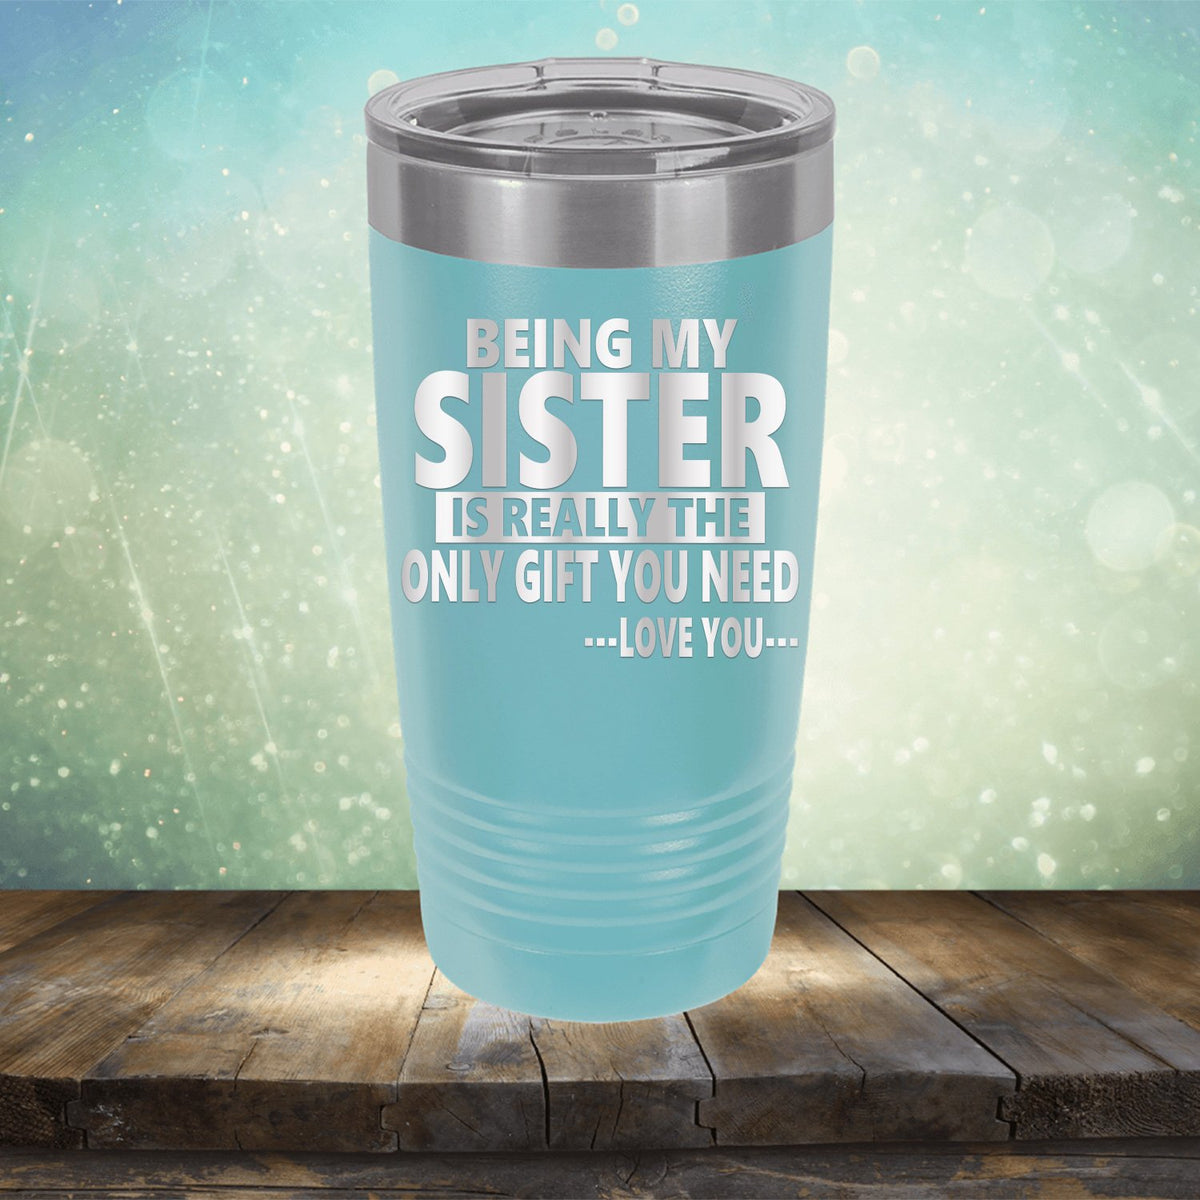 Being My Sister is Really The Only Gift You Need...Love You... - Laser Etched Tumbler Mug